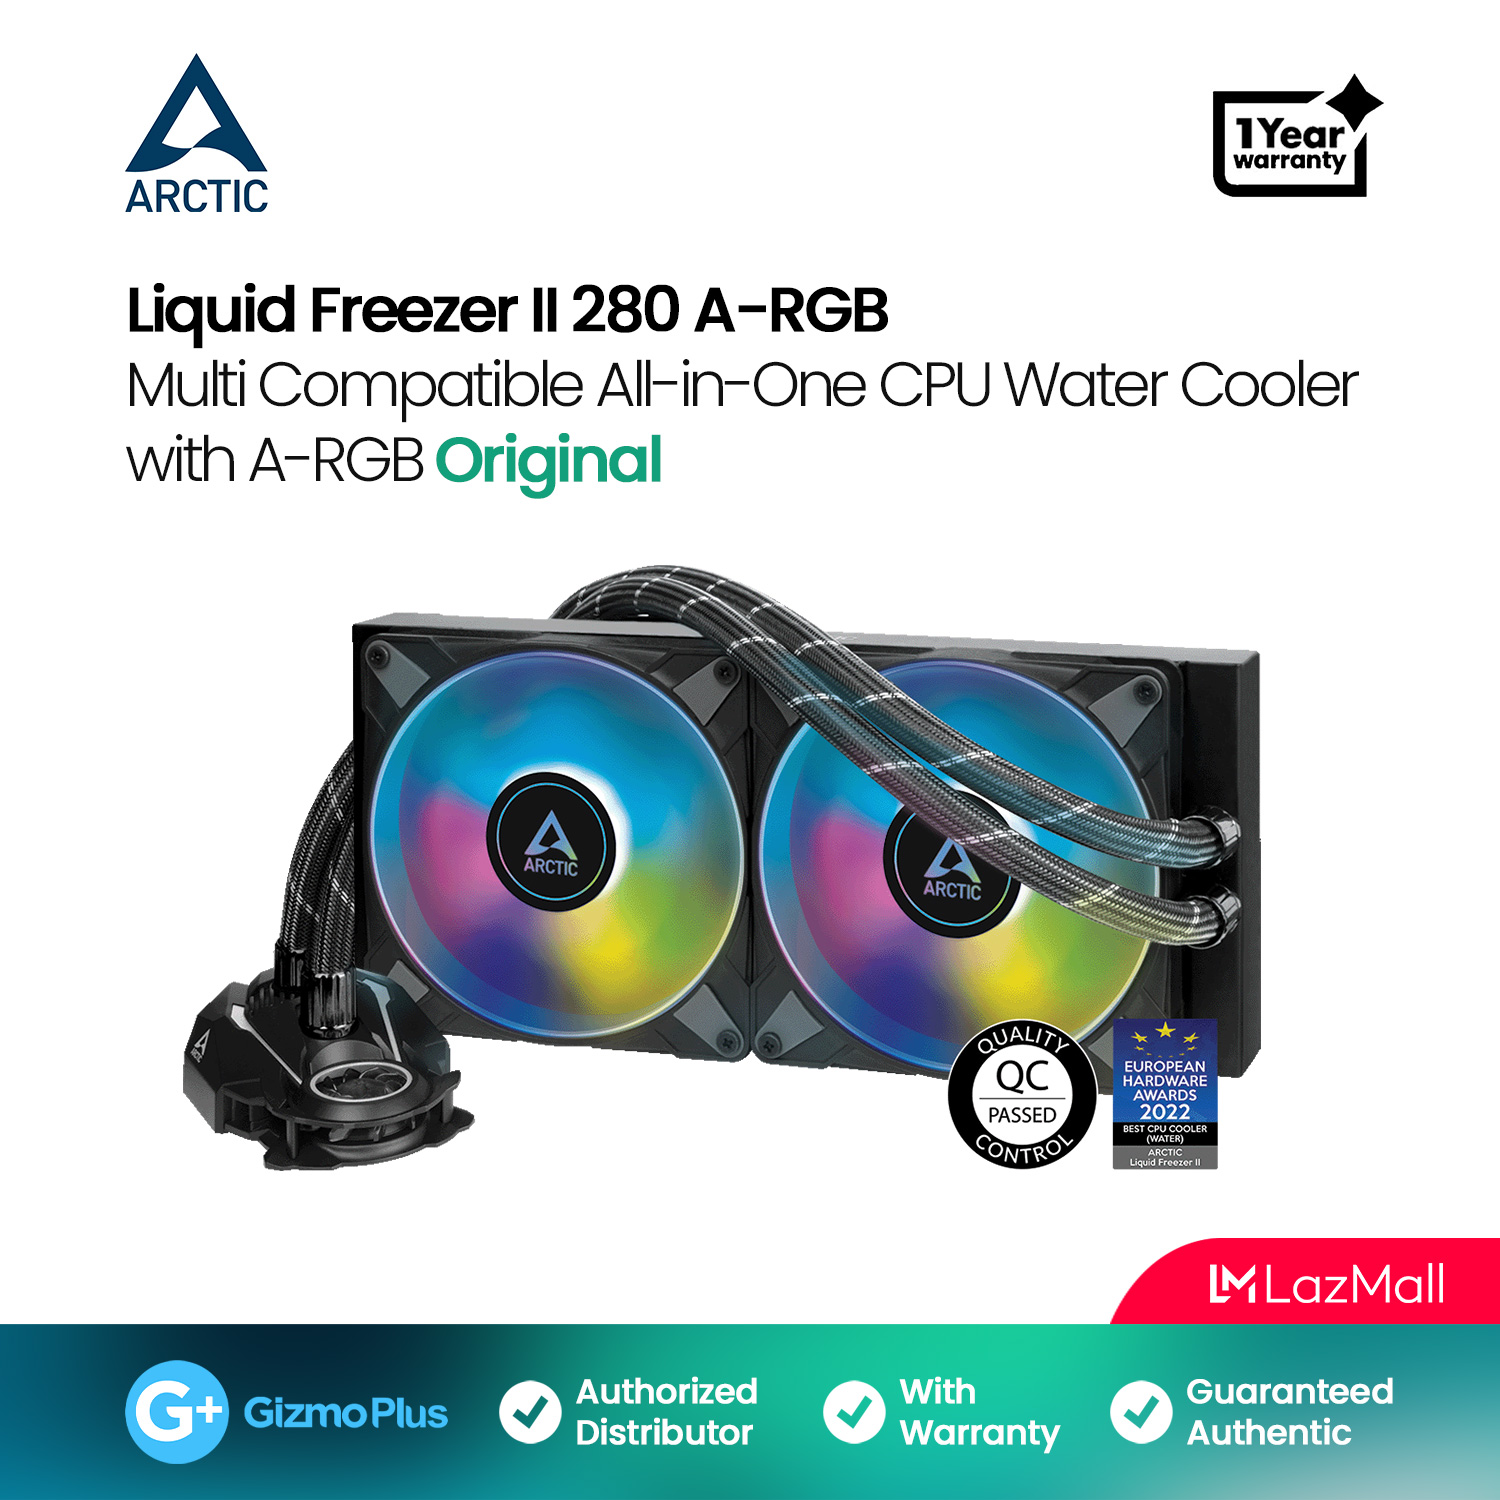 ARCTIC Liquid Freezer II 280 A-RGB - Multi-Compatible All-in-one A